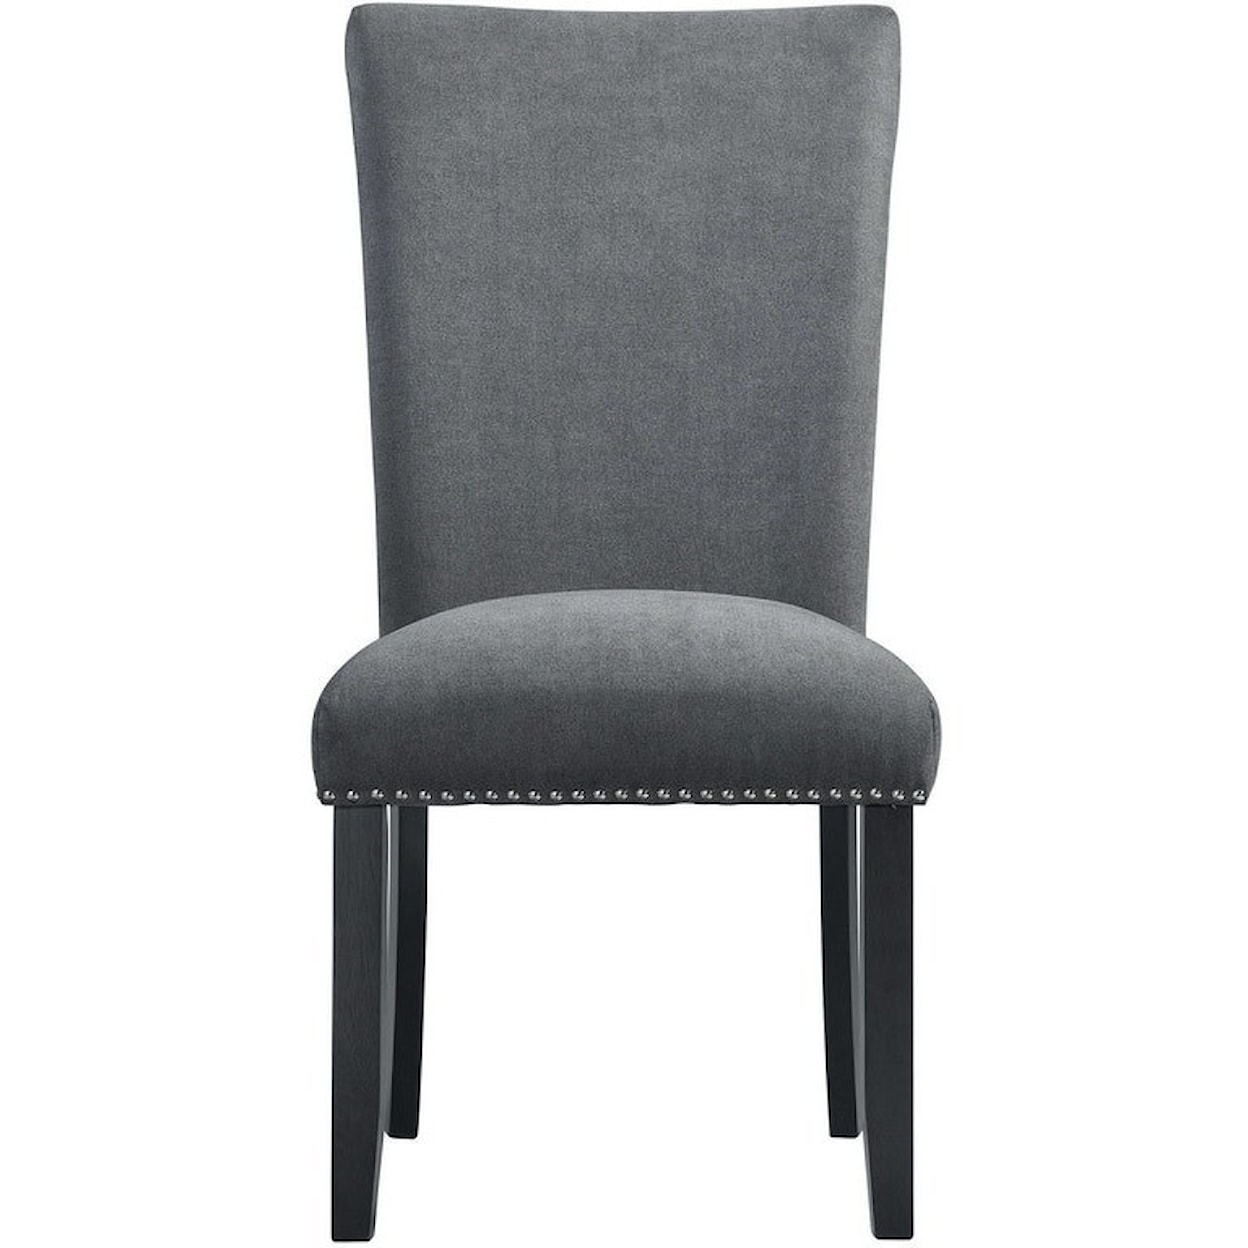 Elements Tuscany Upholstered Side Chair